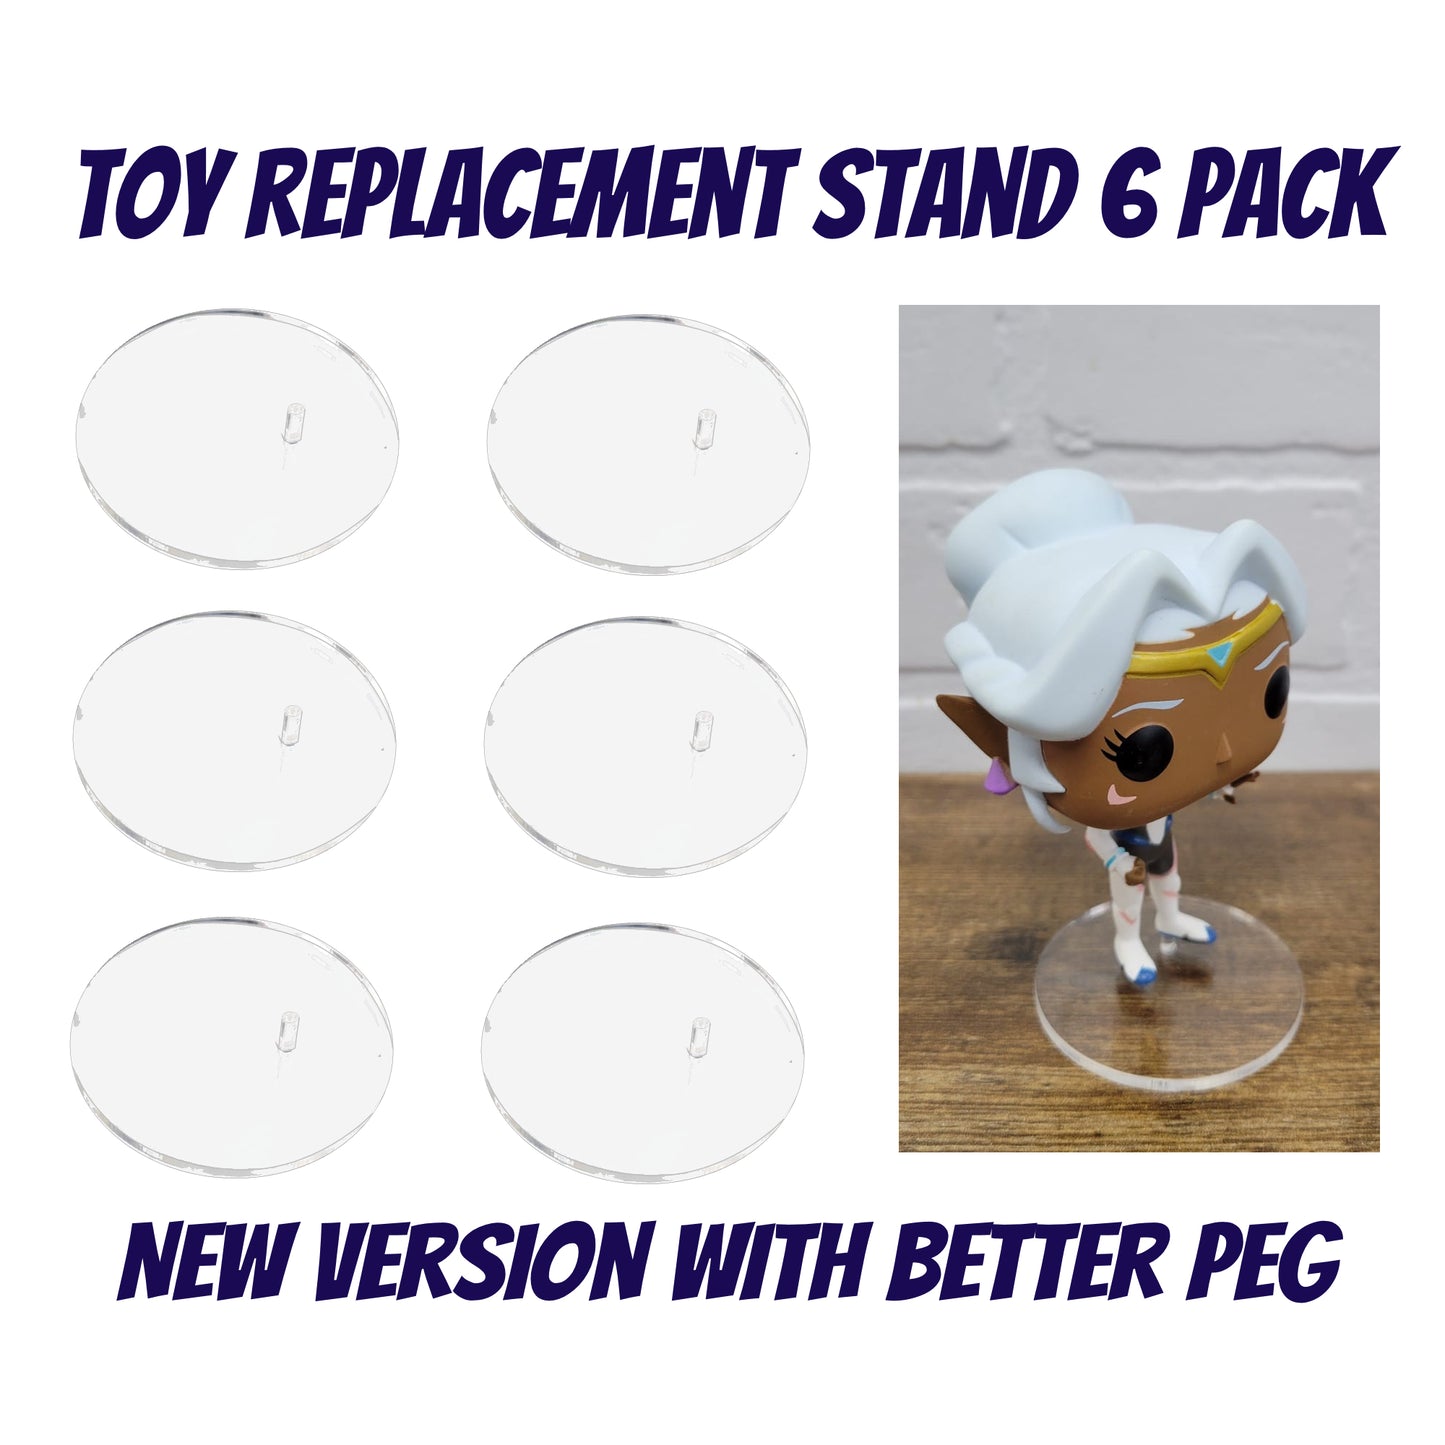 Acrylic Base Toy Stand Replacements, ideal for Funko Pop Vinyl NEW VERSION